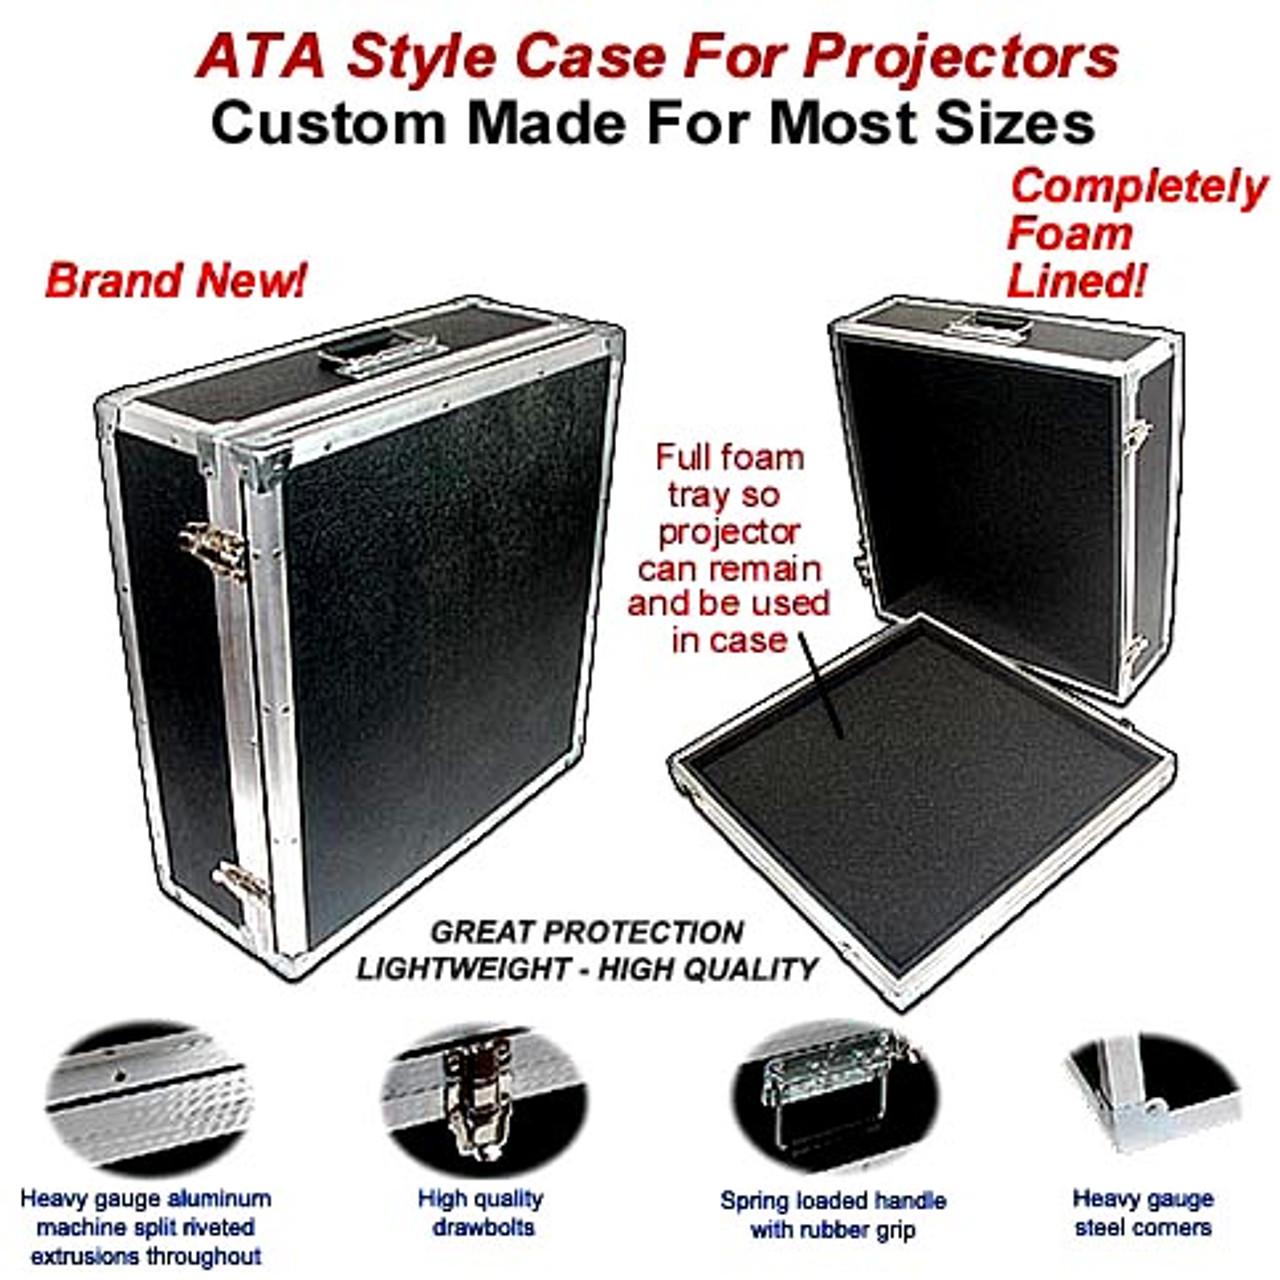 1/4 ATA Projector Cases by Brand and Model